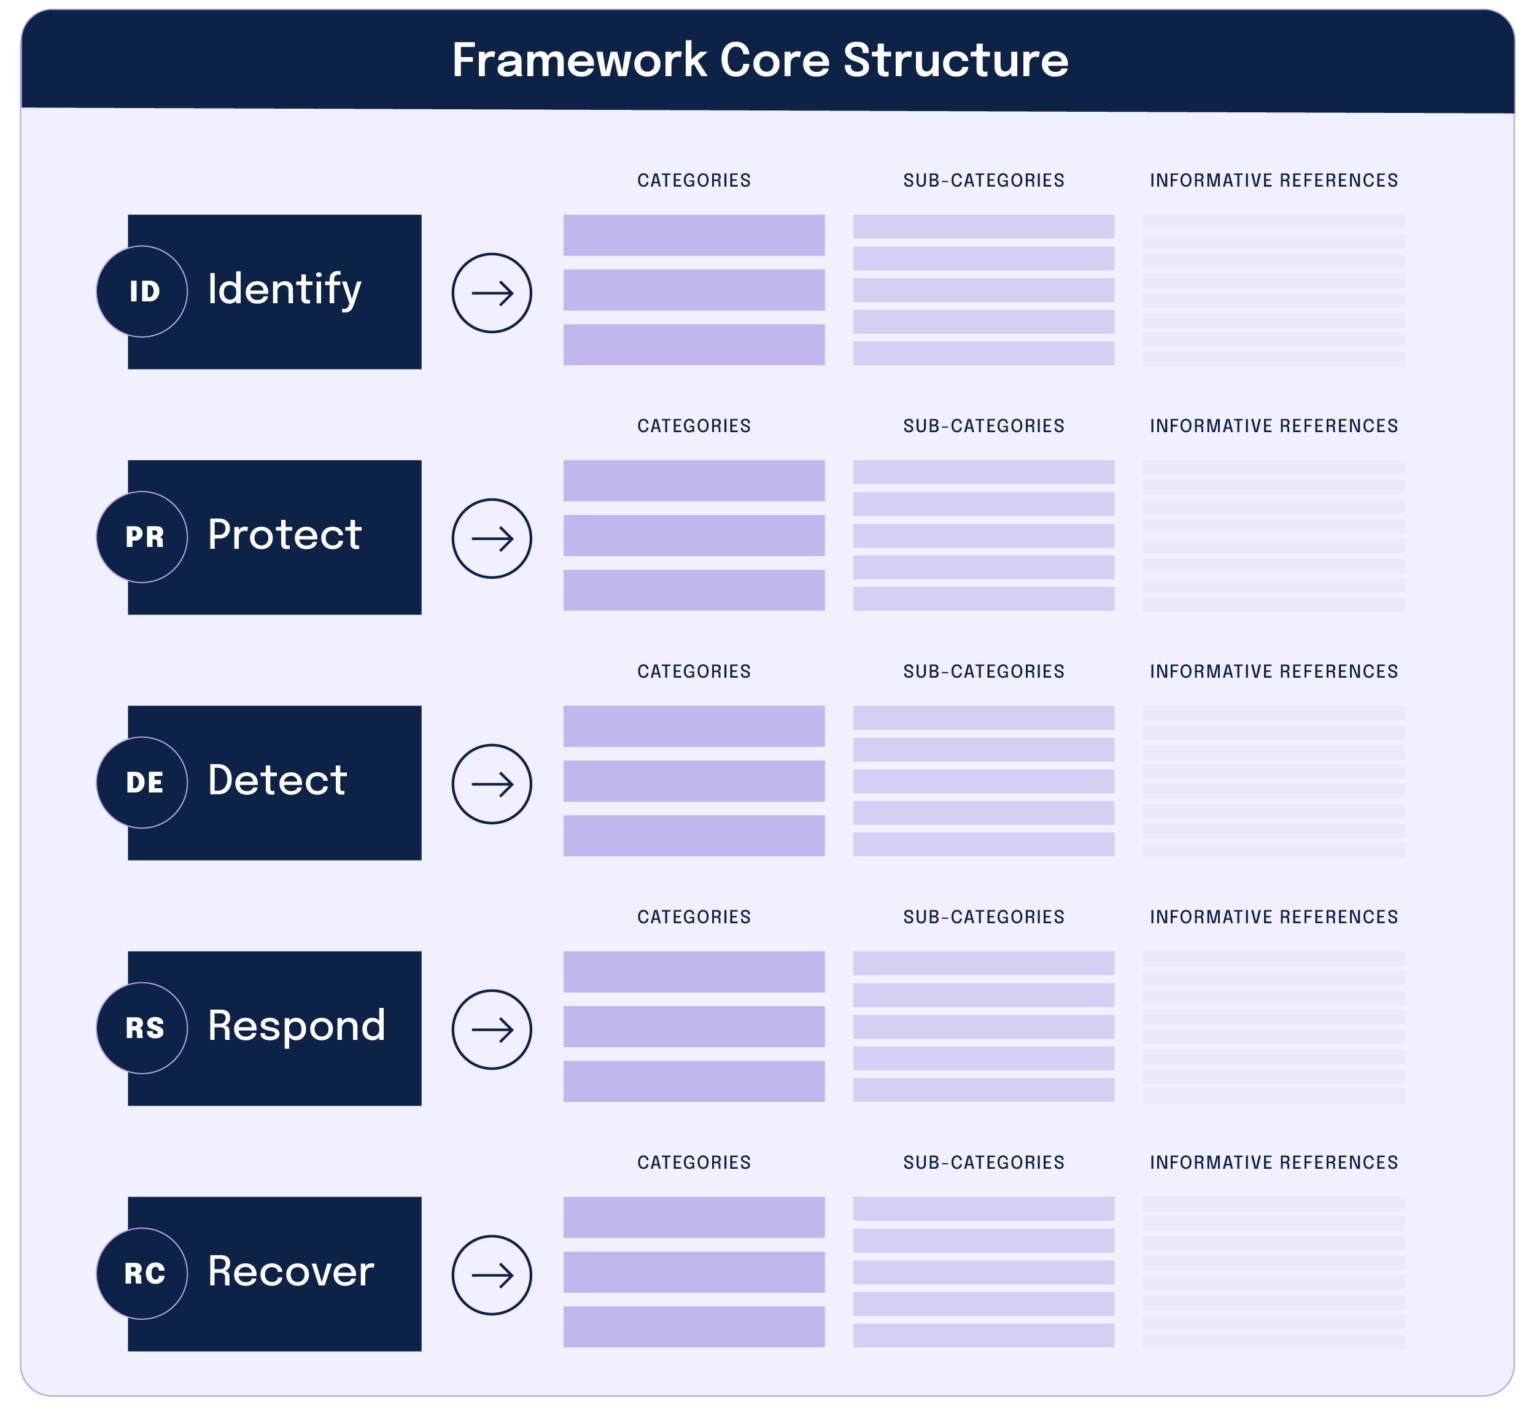 NIST Framework Core Structure broken into subcategories: identify, protect, detect, respond, and recover